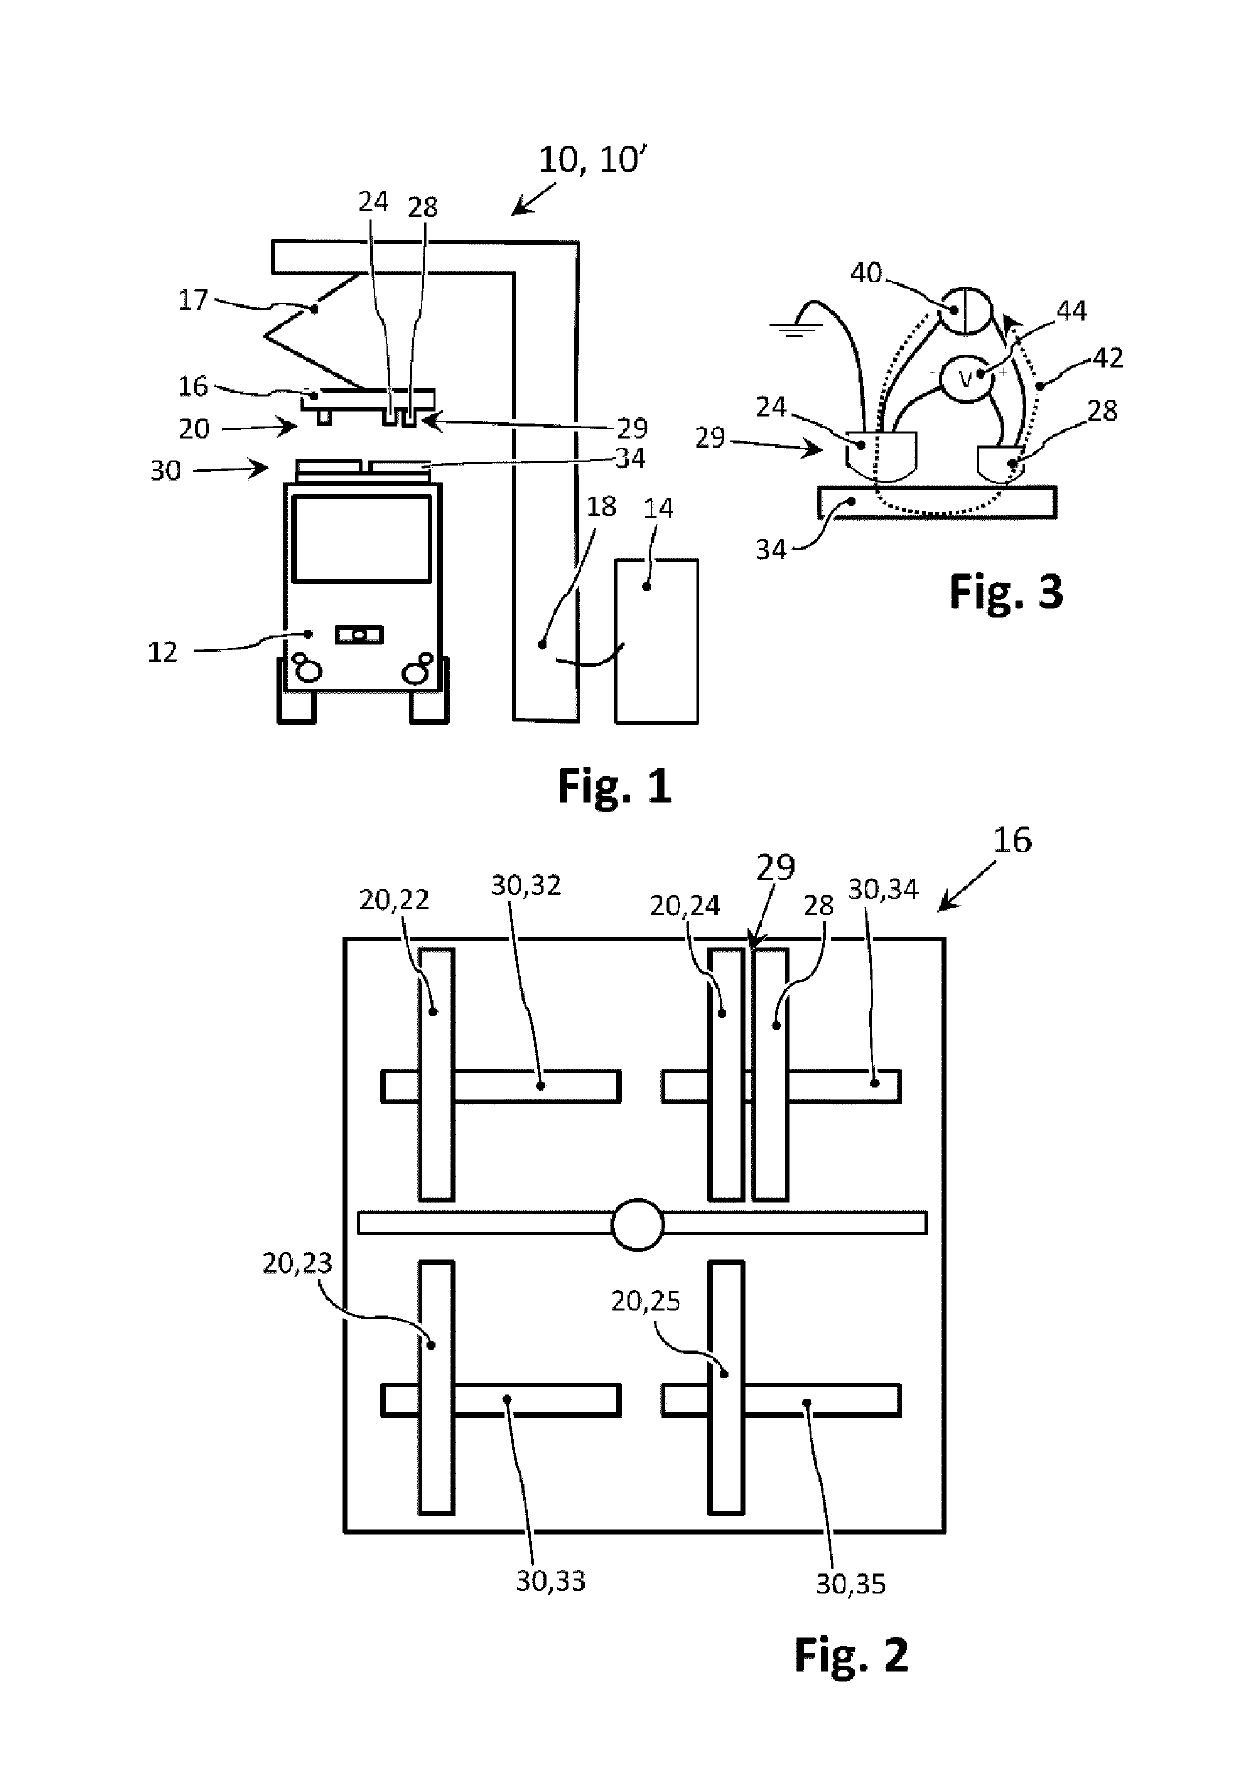 Device for charging an electric vehicle and a method for verifying the contact between a device for charging an electric vehicle and the electric vehicle